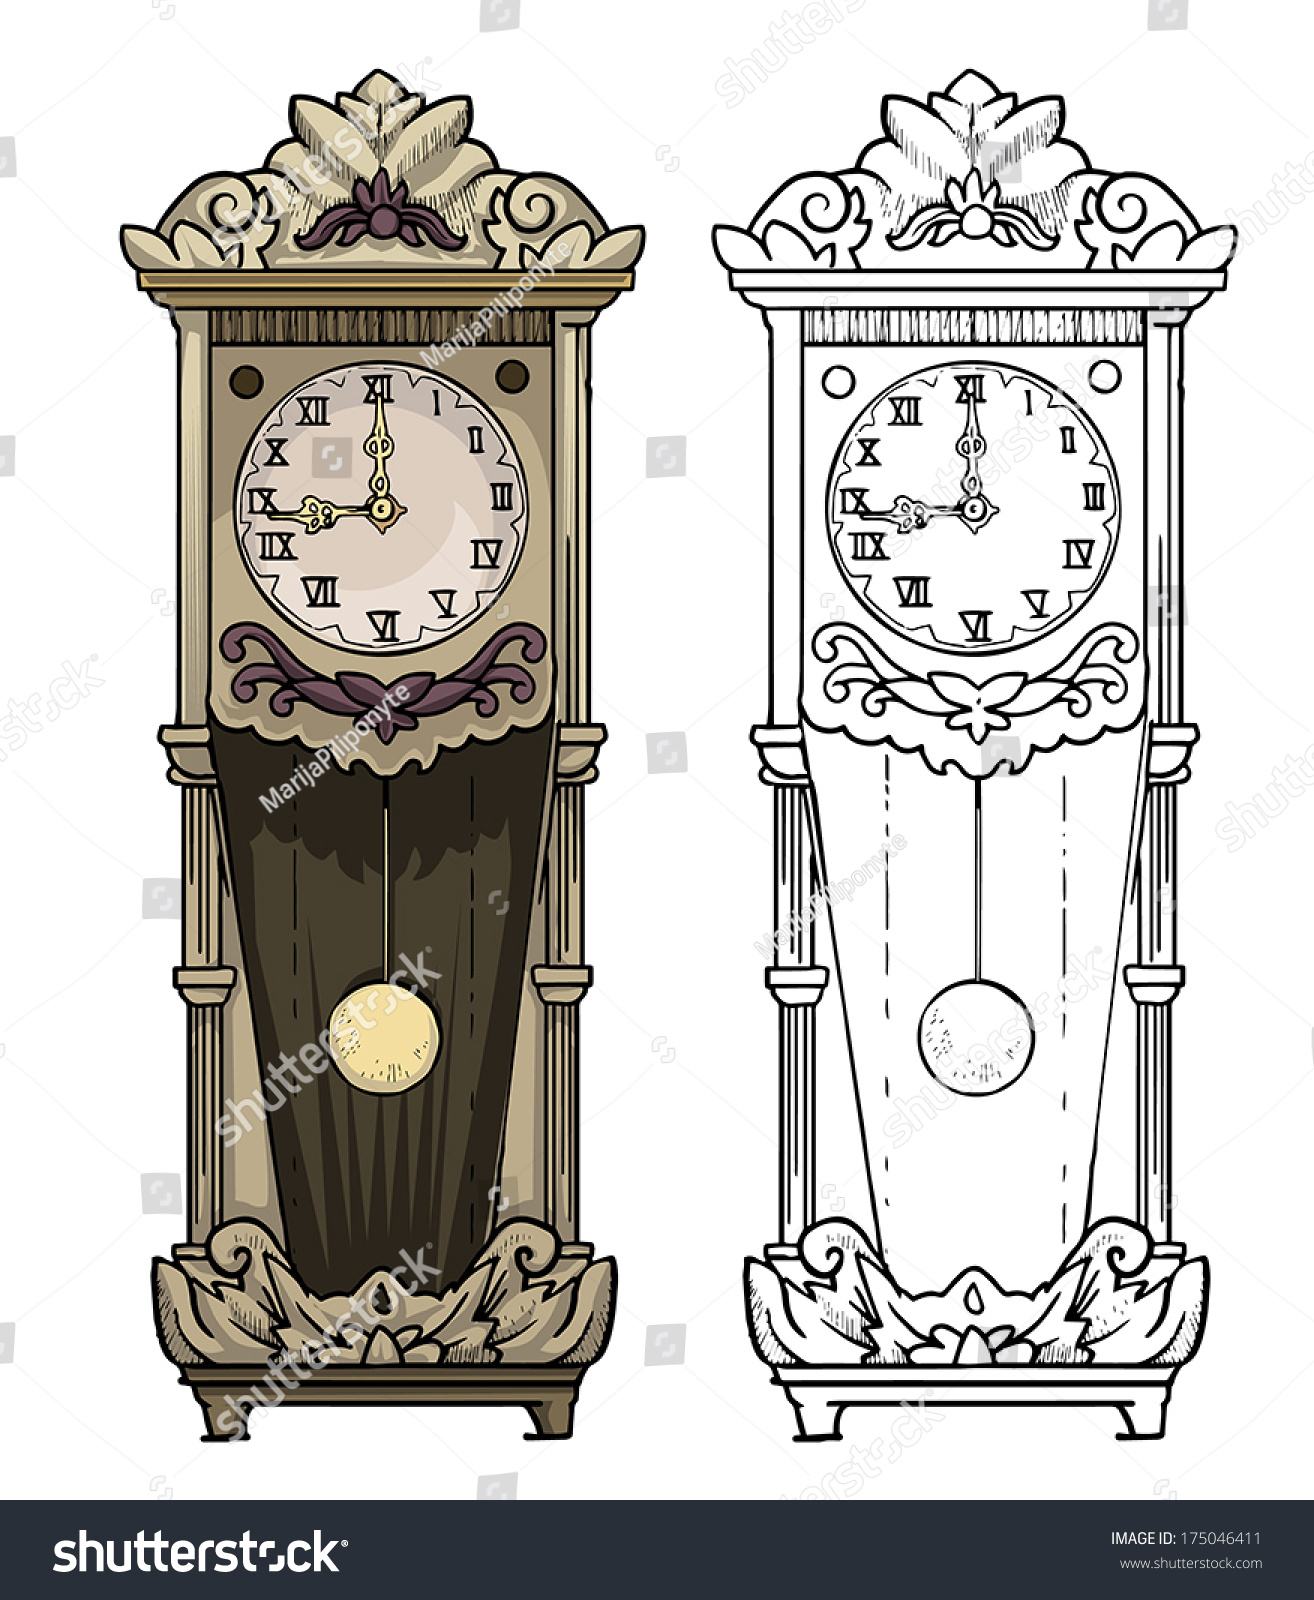 Old Clock Drawing - ClipartXtras